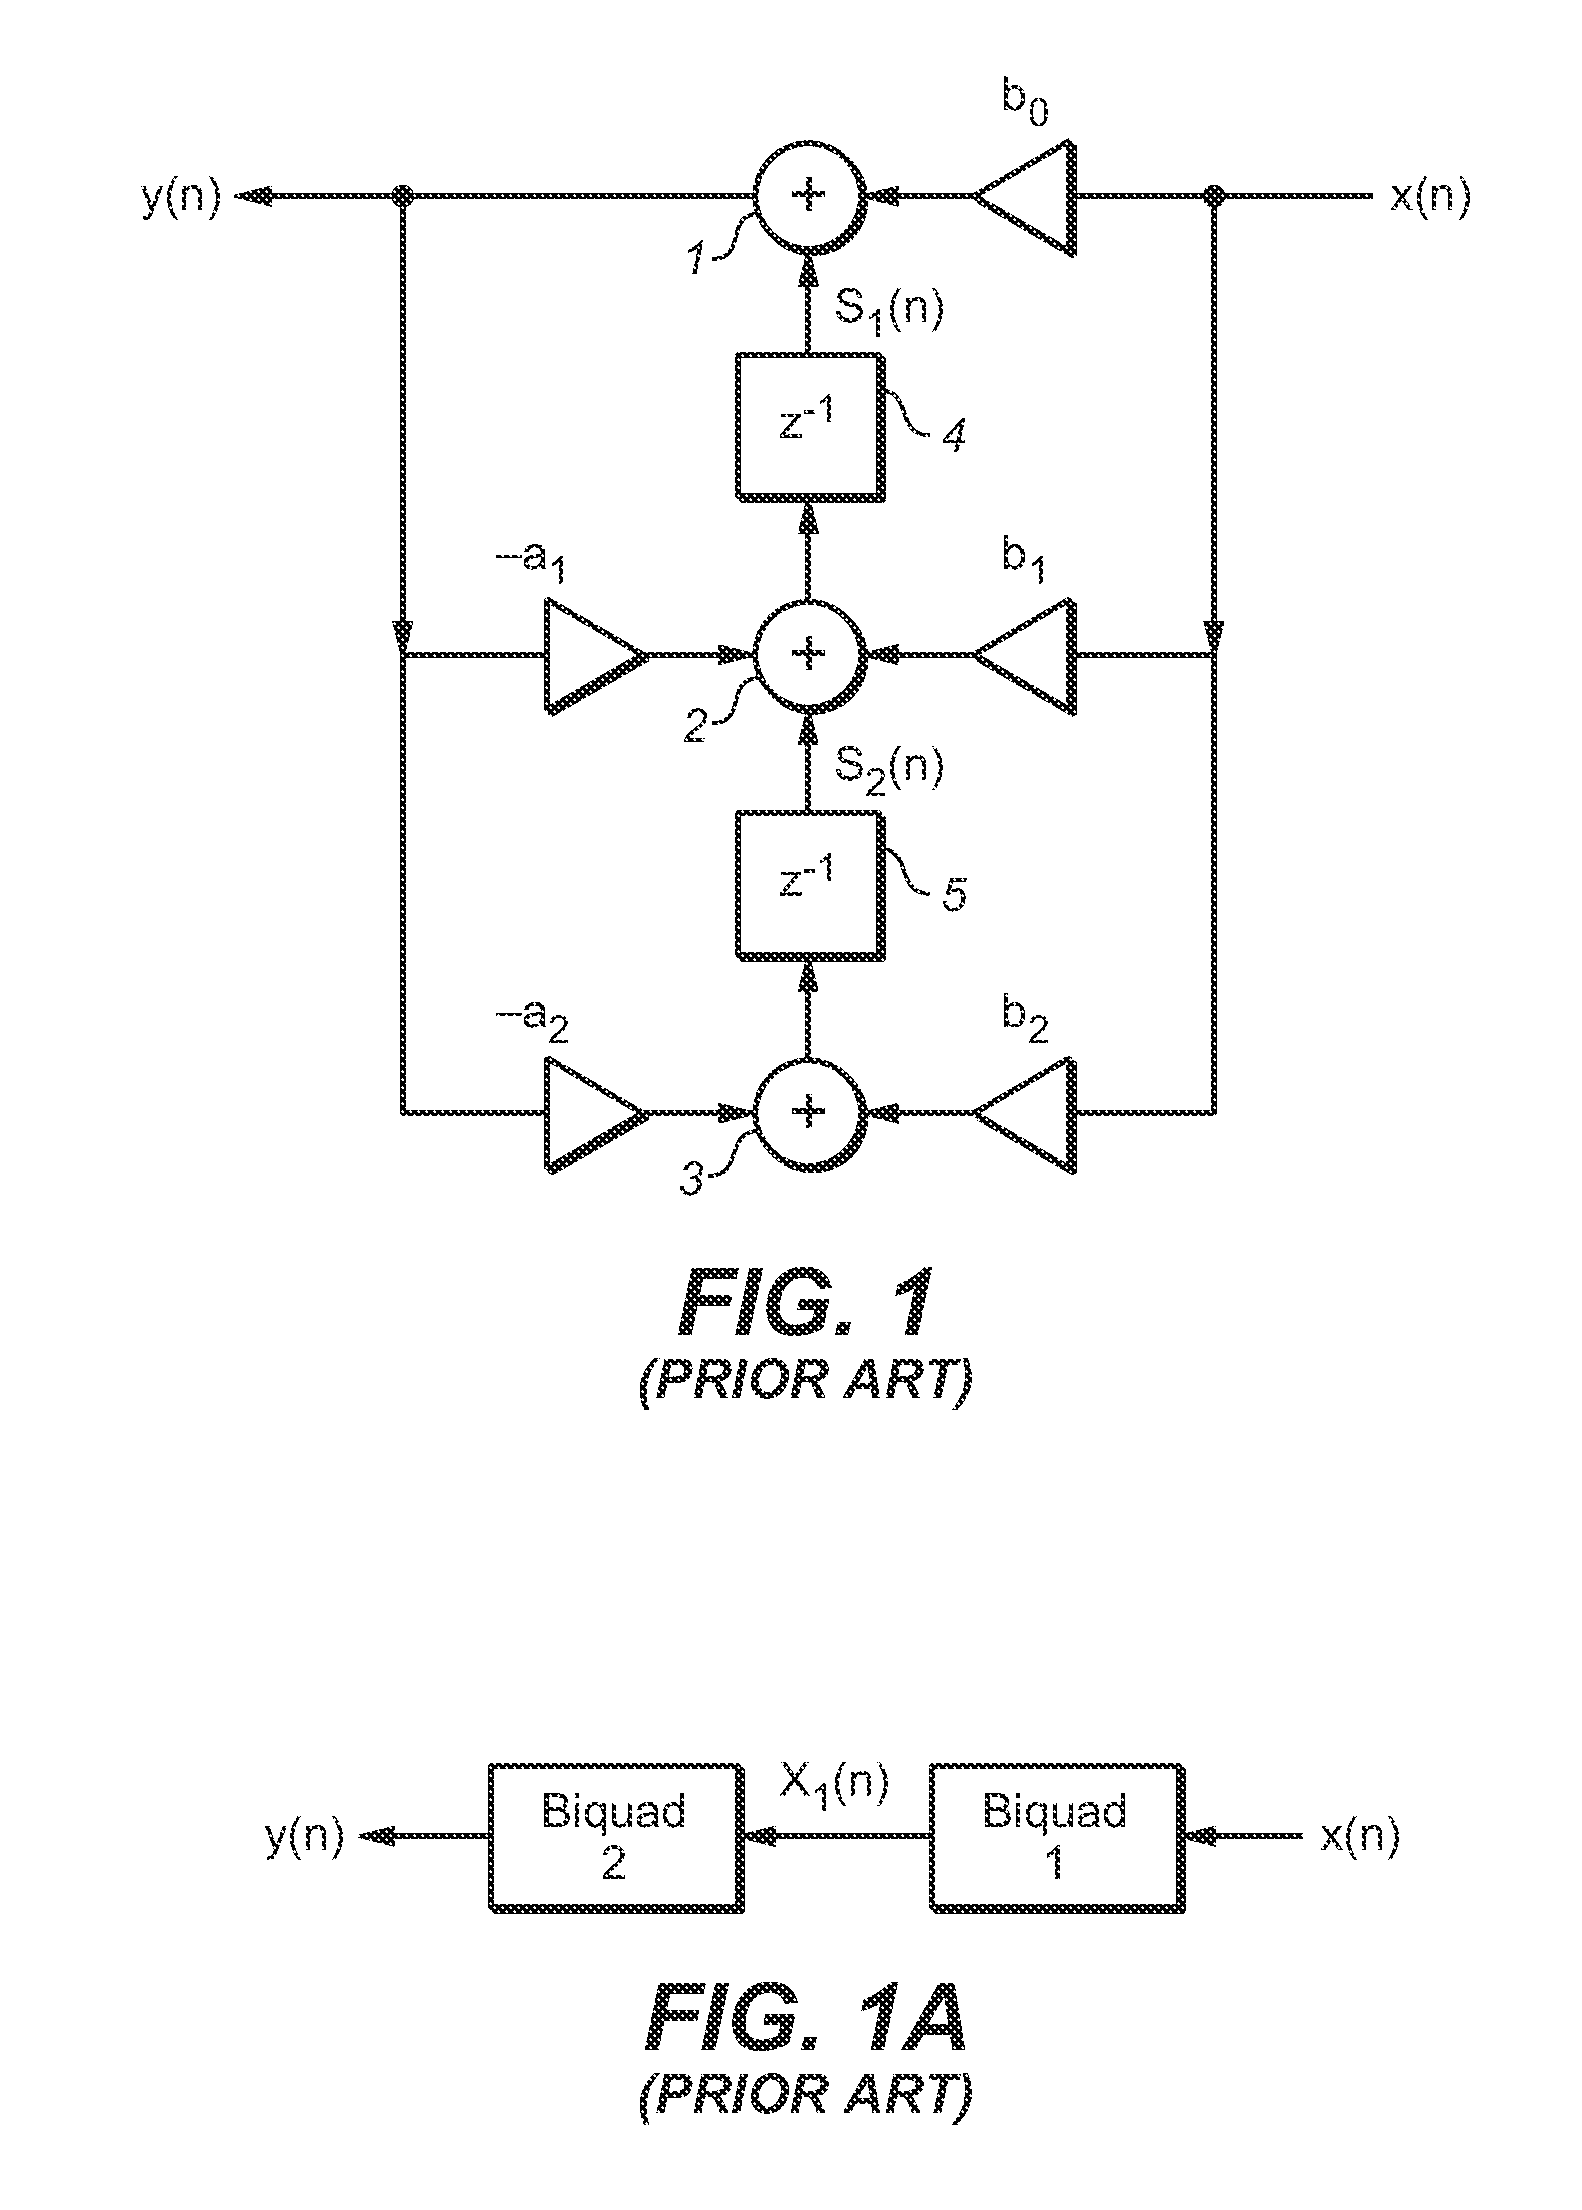 Multistage IIR Filter and Parallelized Filtering of Data with Same